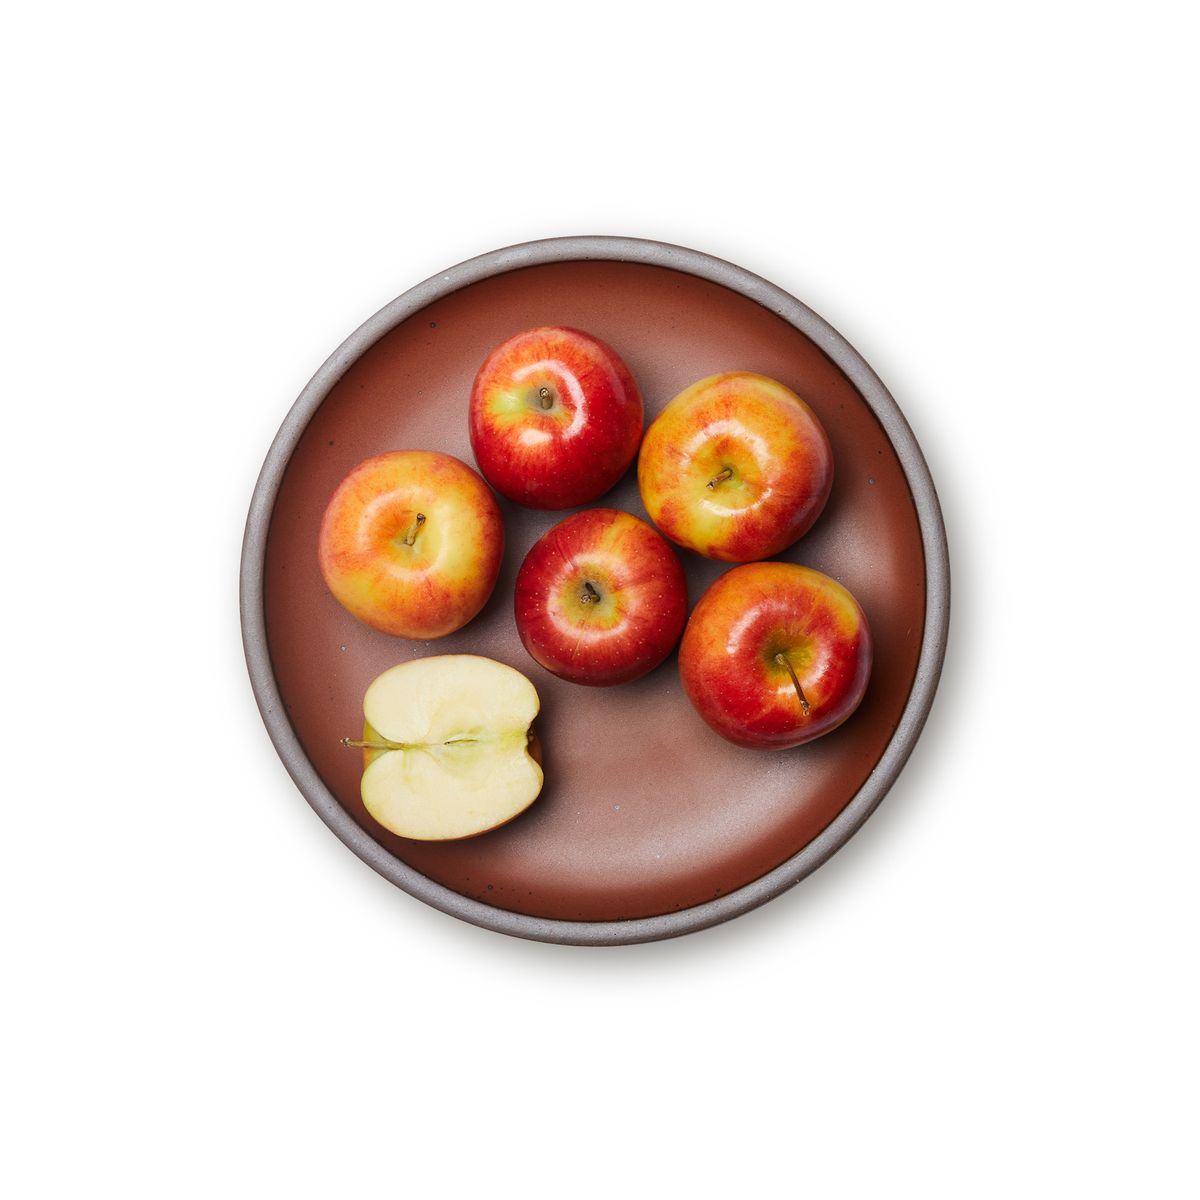 Amaro dinner plate with apples